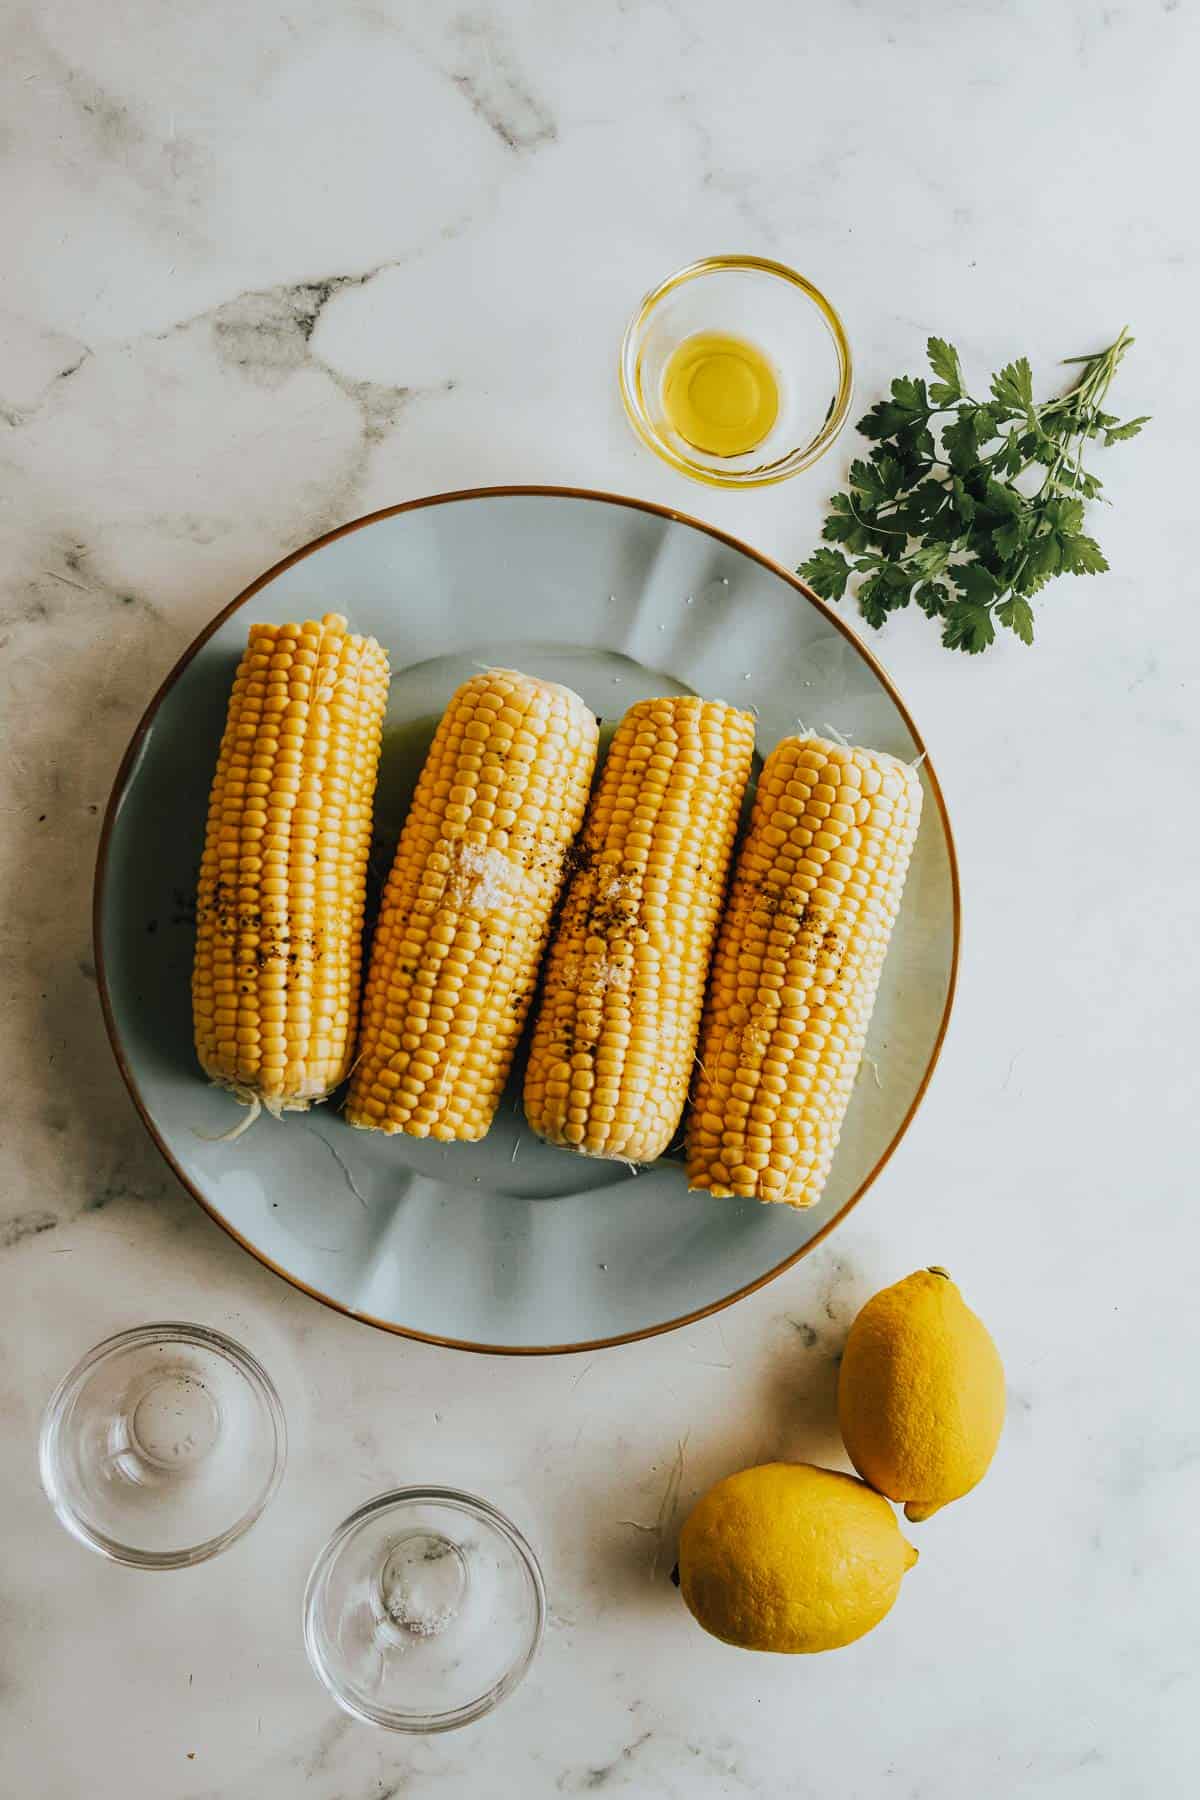 Corn on the cob with lemon and herbs.